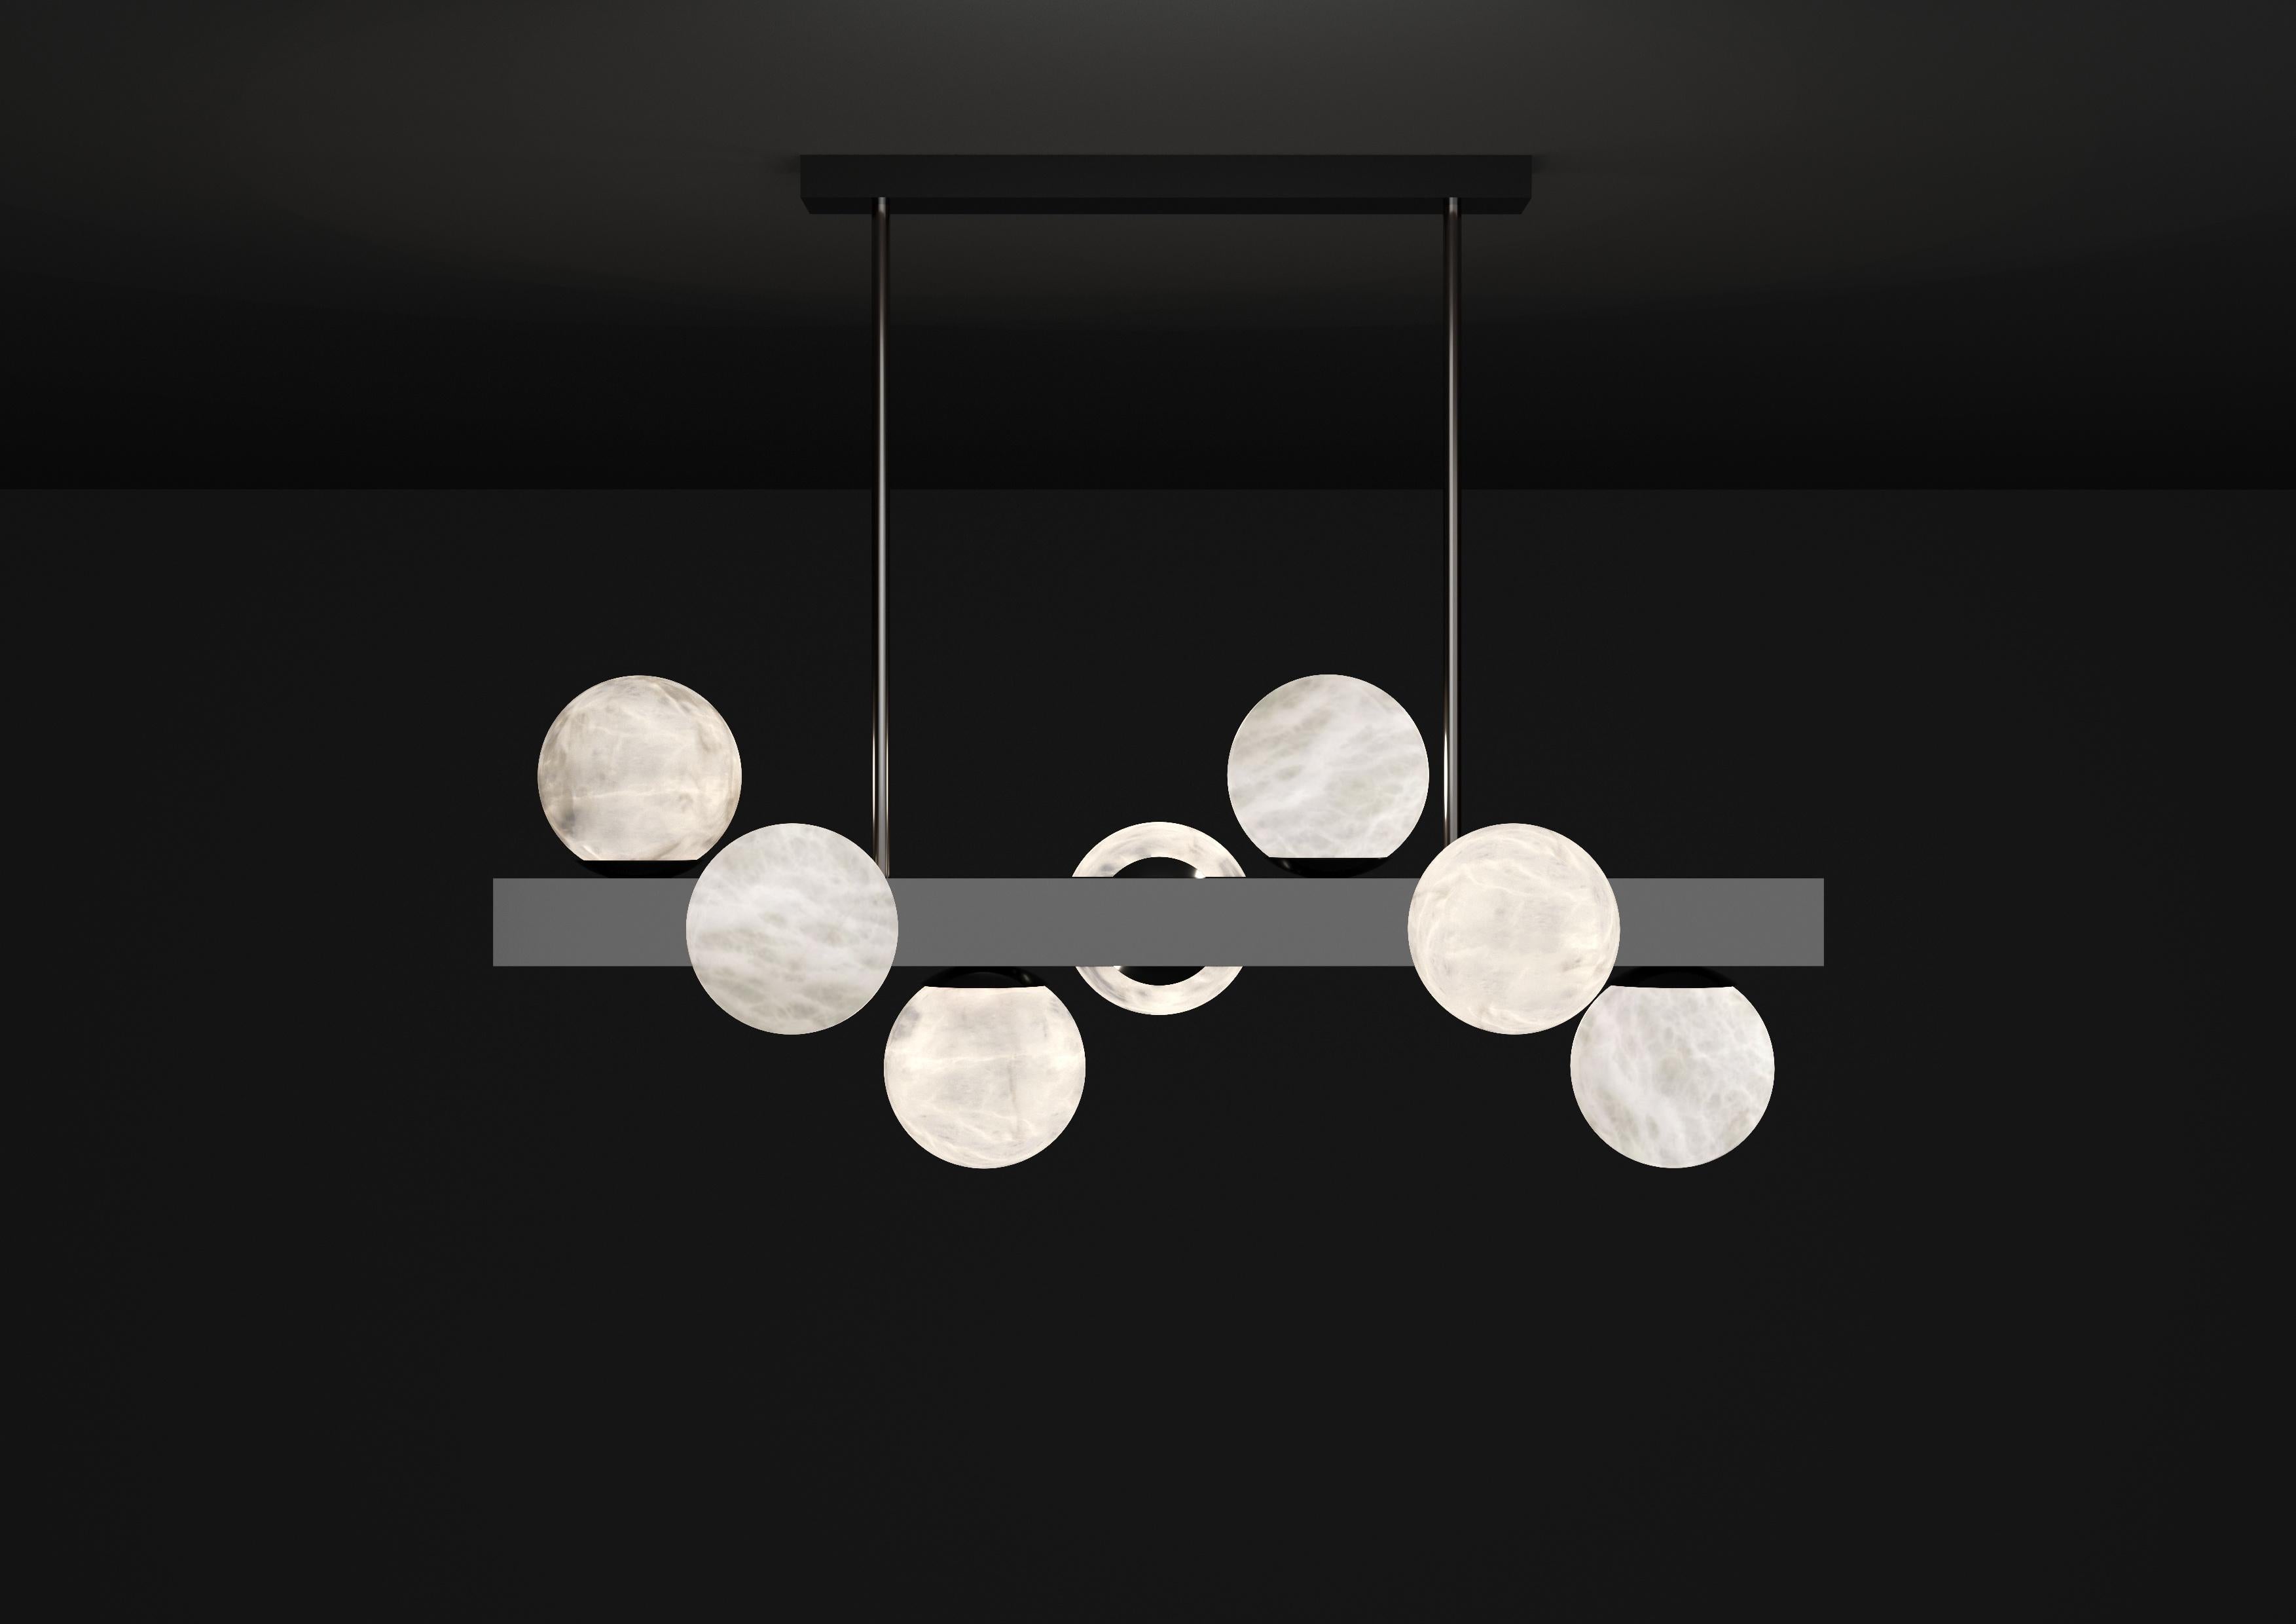 Dioniso Shiny Black Metal Pendant Lamp by Alabastro Italiano
Dimensions: D 35 x W 91 x H 36 cm.
Materials: White alabaster and metal.

Available in different finishes: Shiny Silver, Bronze, Brushed Brass, Ruggine of Florence, Brushed Burnished,